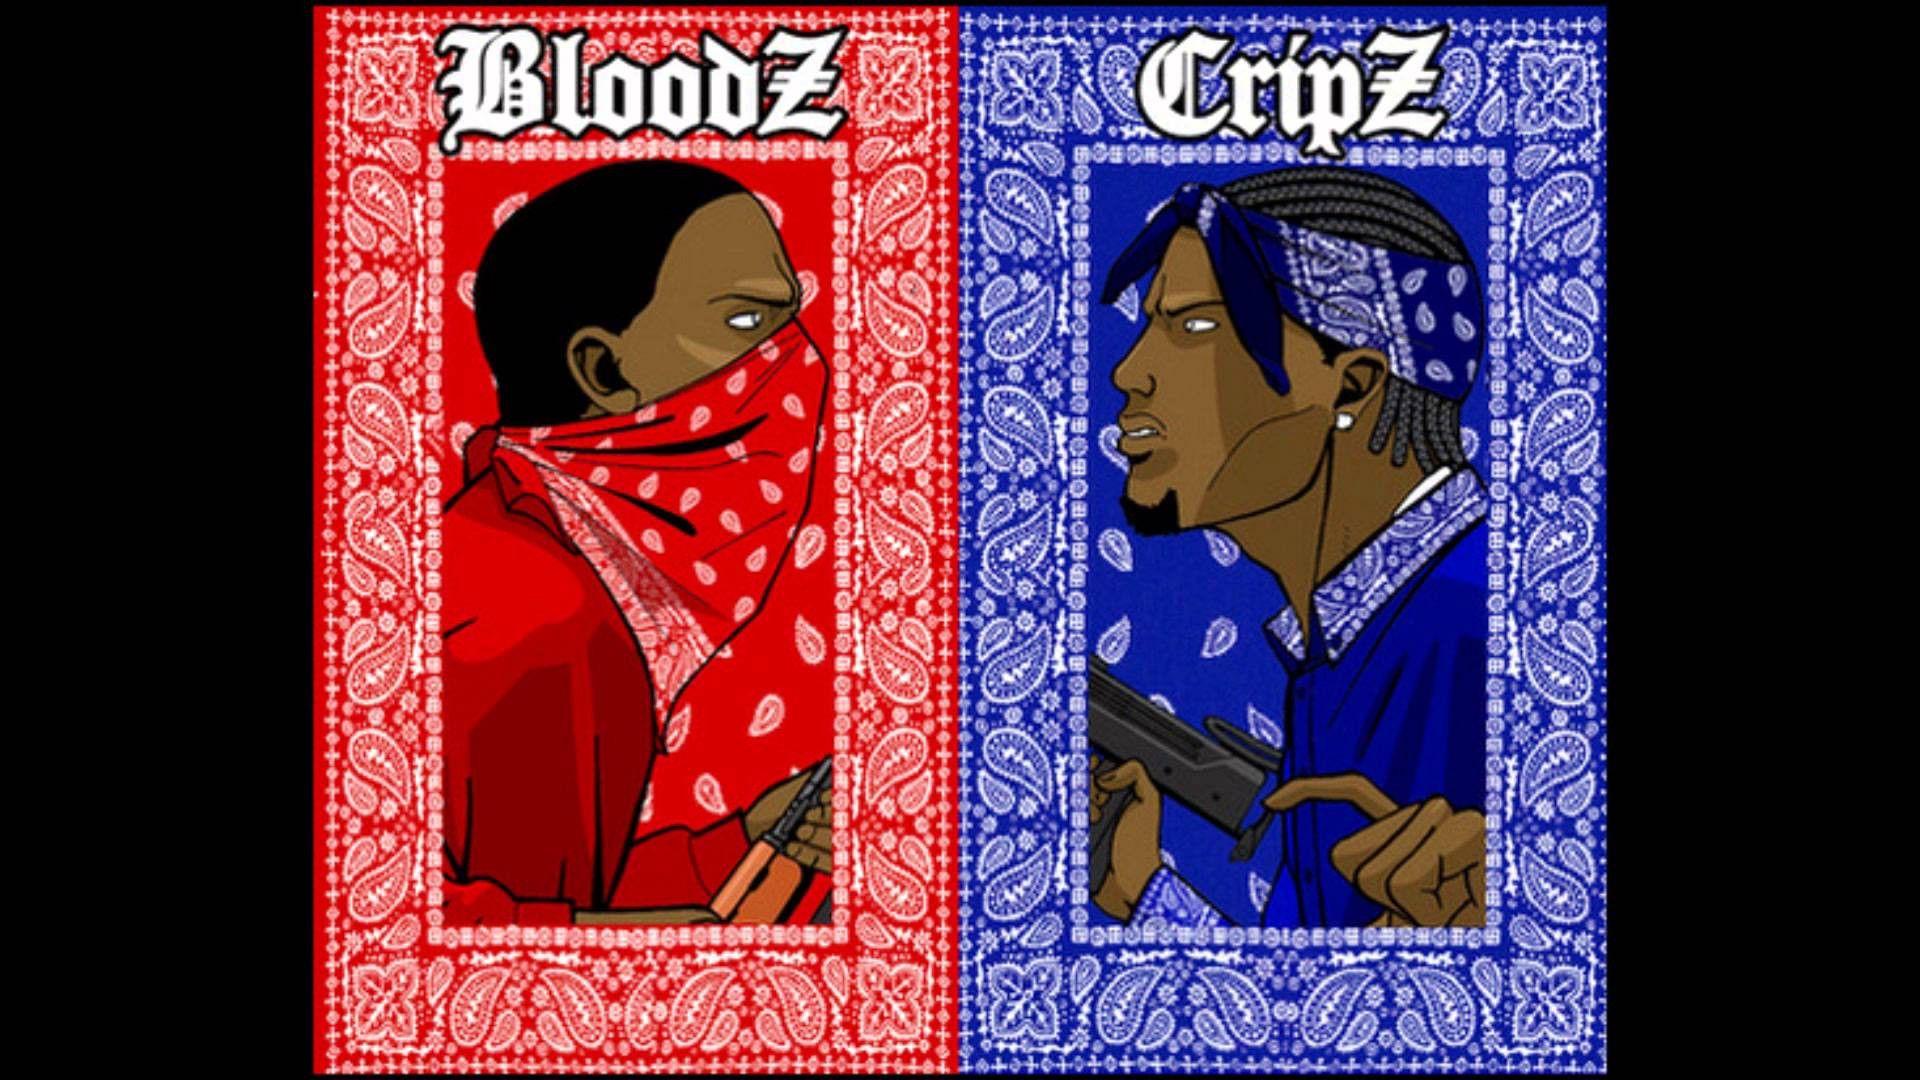 61 Bloods and Crips